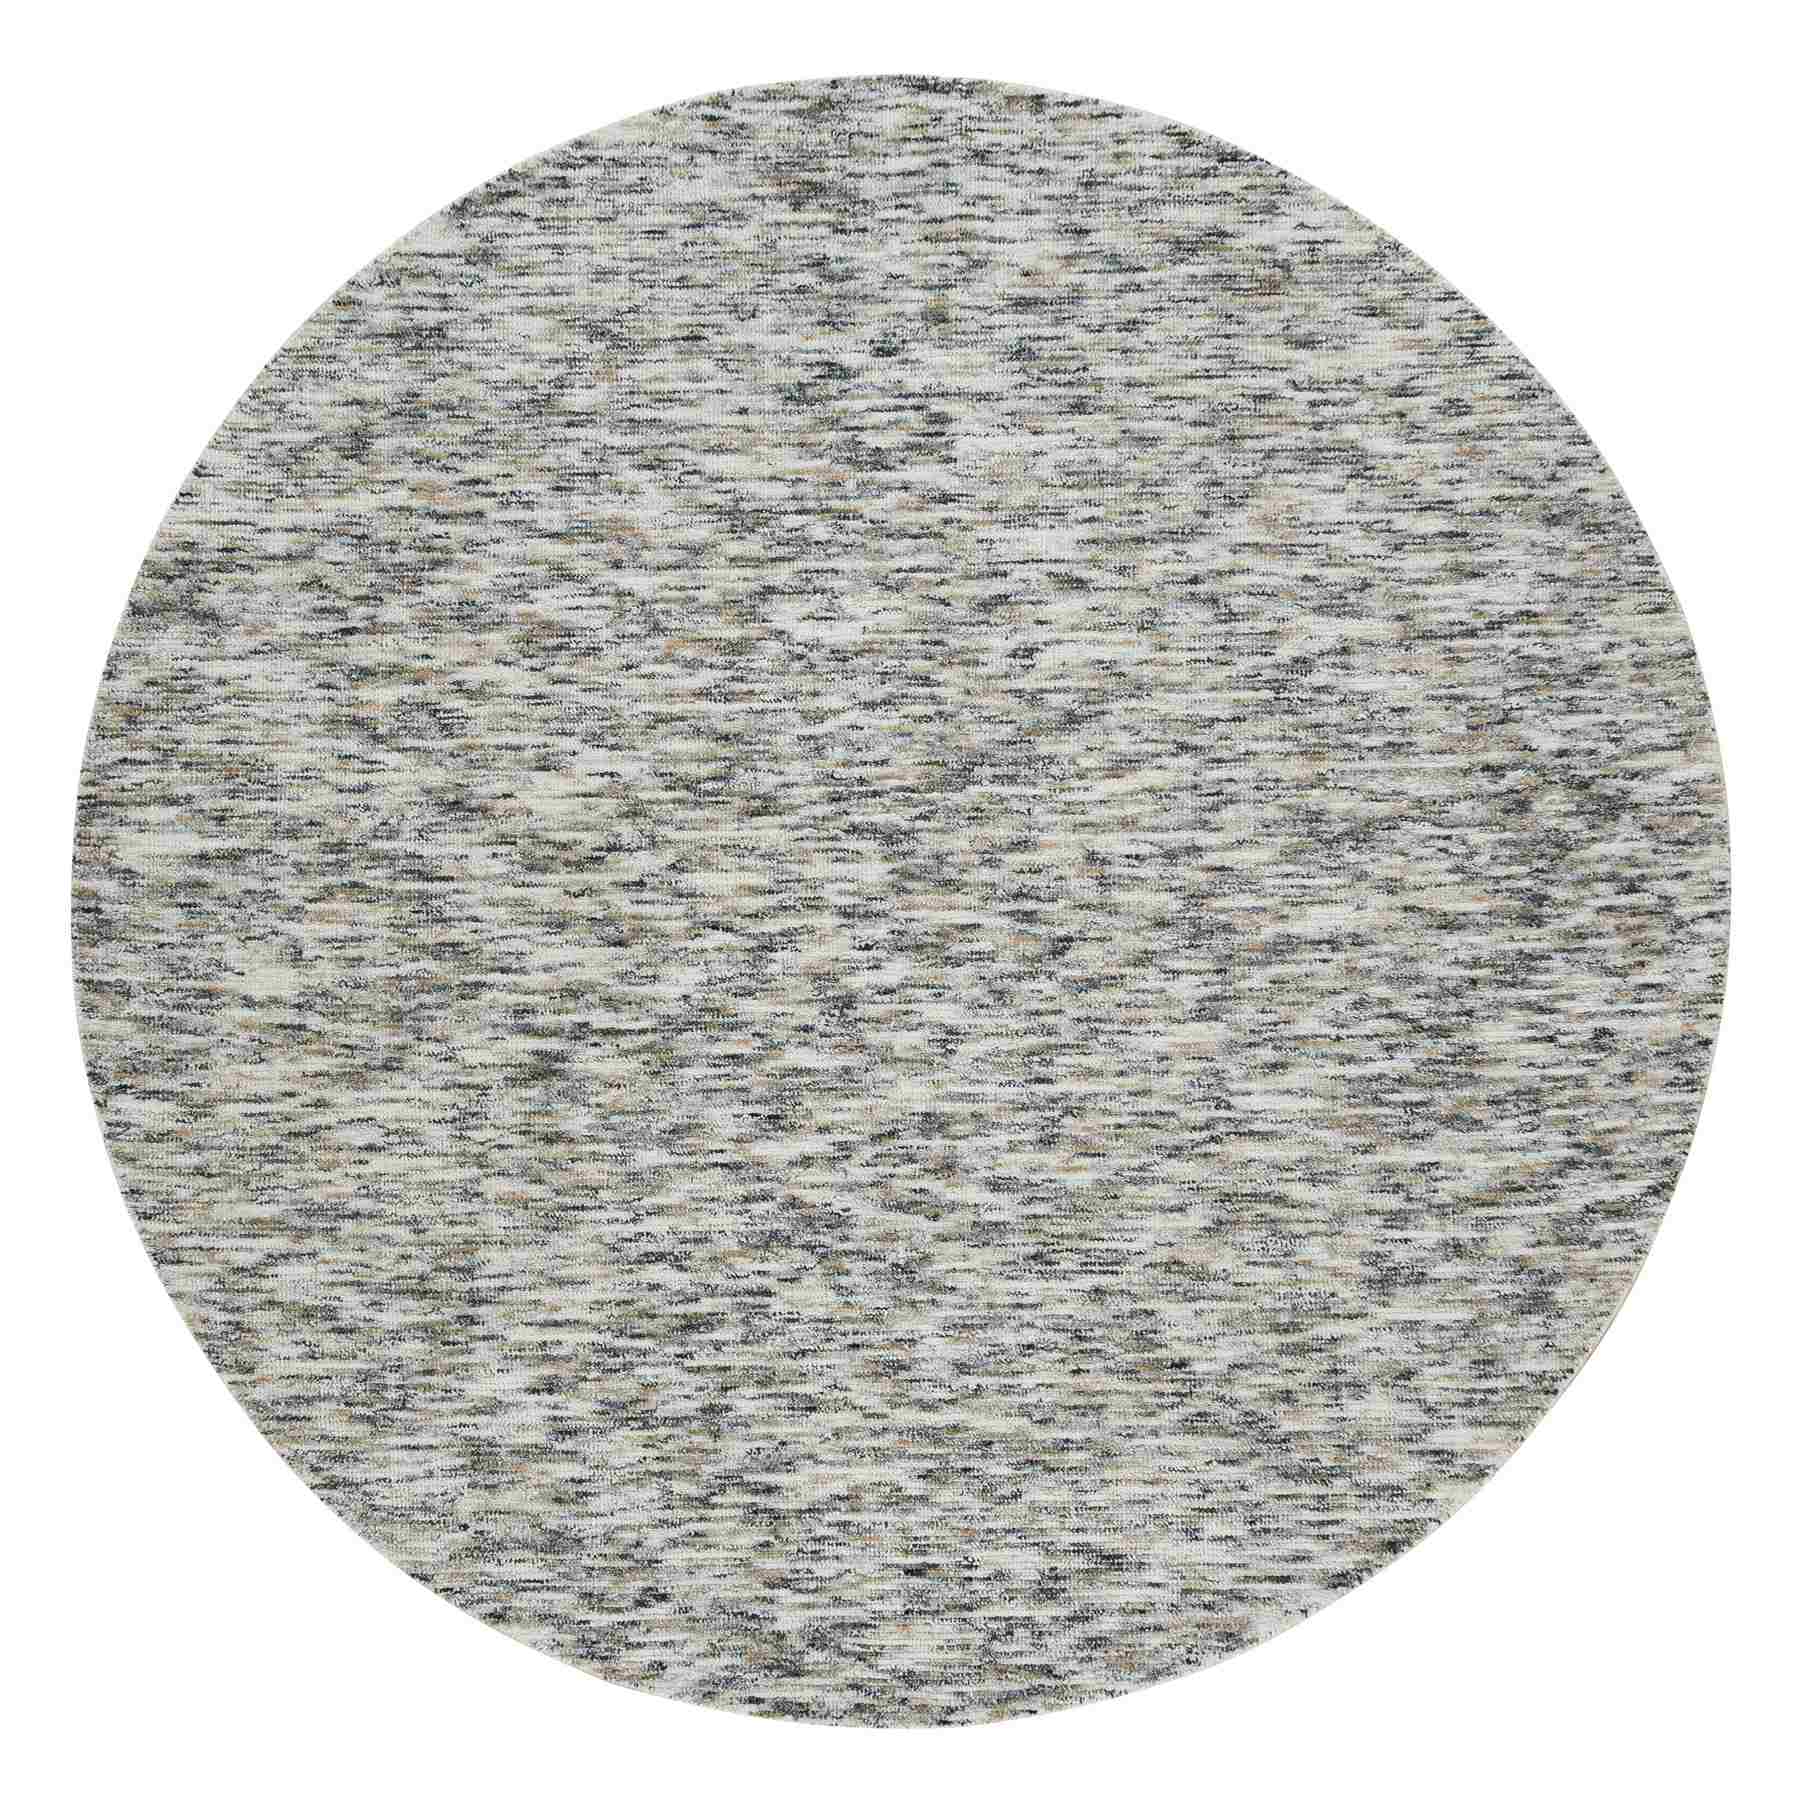 Earth Tone Colors, Pure Wool, Hand Loomed, Modern Striae Design, Soft to the Touch Round Oriental Rug